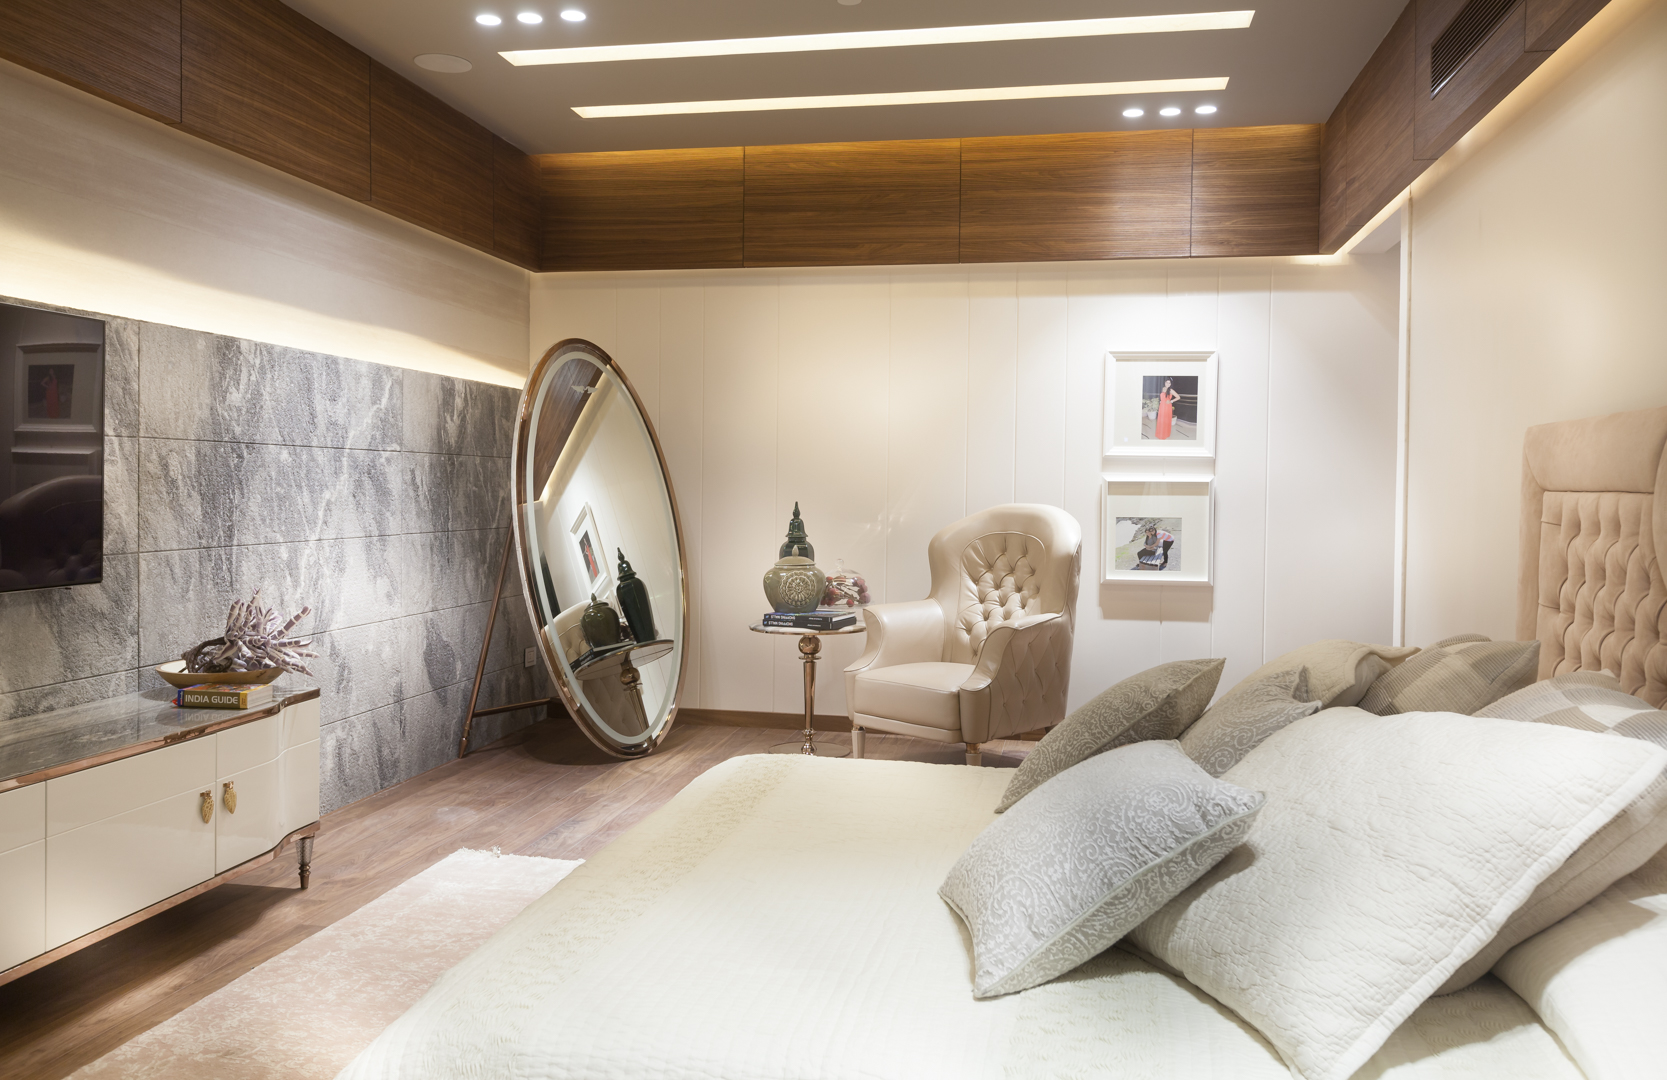 Design of a Bed Room by Essentia Environments